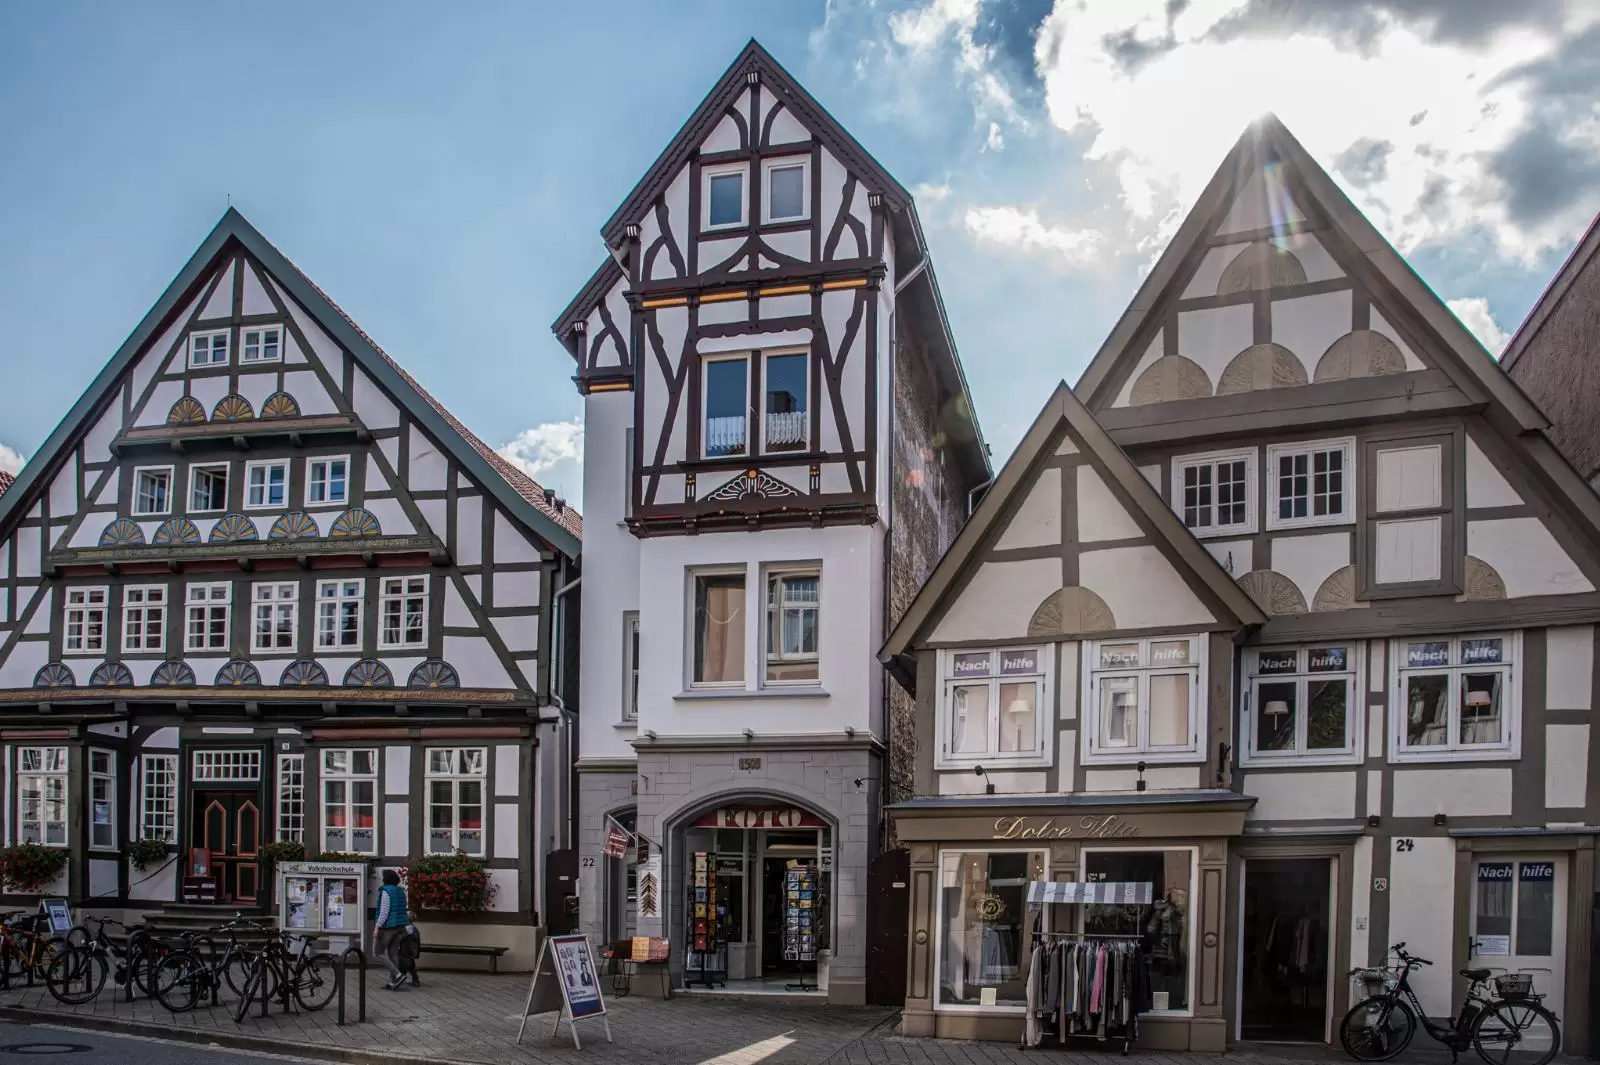 Detmold Old Town